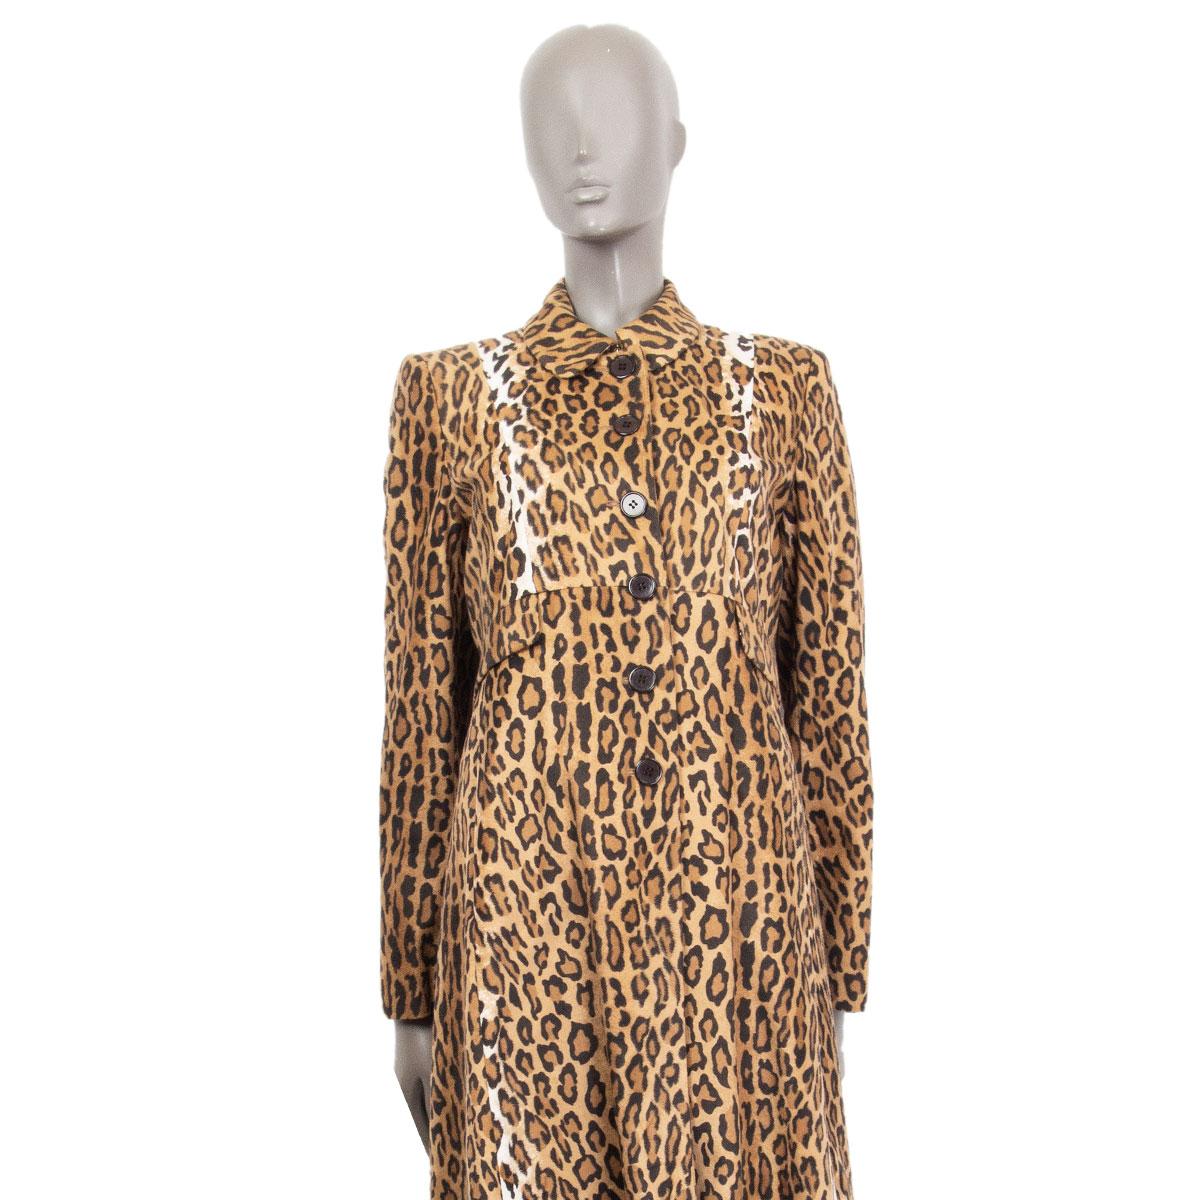 100% authentic Moschino Cheap&Chic leopard print single-breasted coat in espresso brown, camel, beige and off-white rayon (67%) and polyester (33%). Lined in polka-dot espresso brown rayon (100%). Faux flap-pockets at front. Has been worn and is in